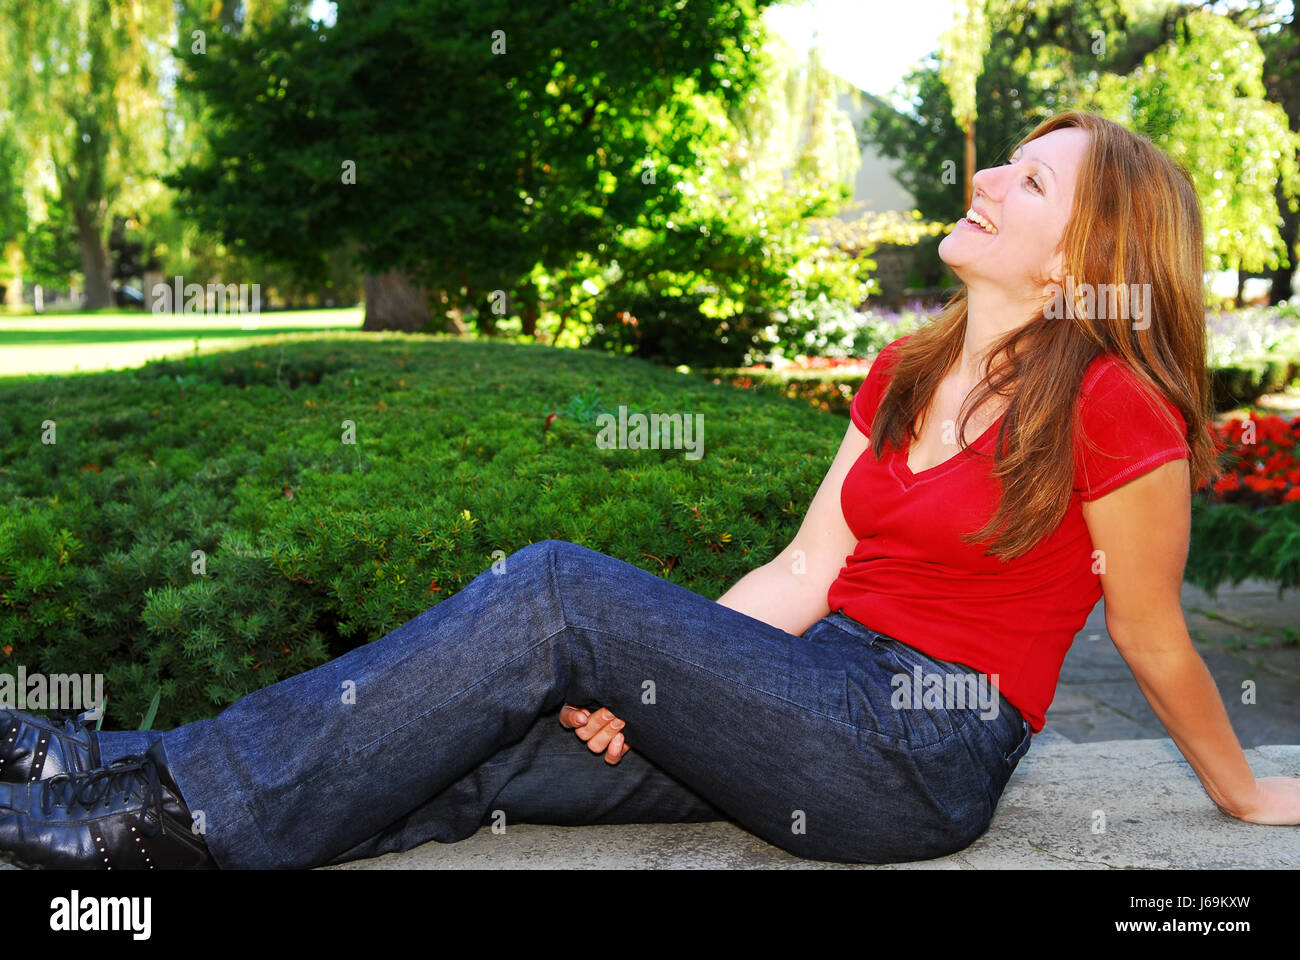 woman middle aged forties facilitate ease resting relax recover relaxing Stock Photo